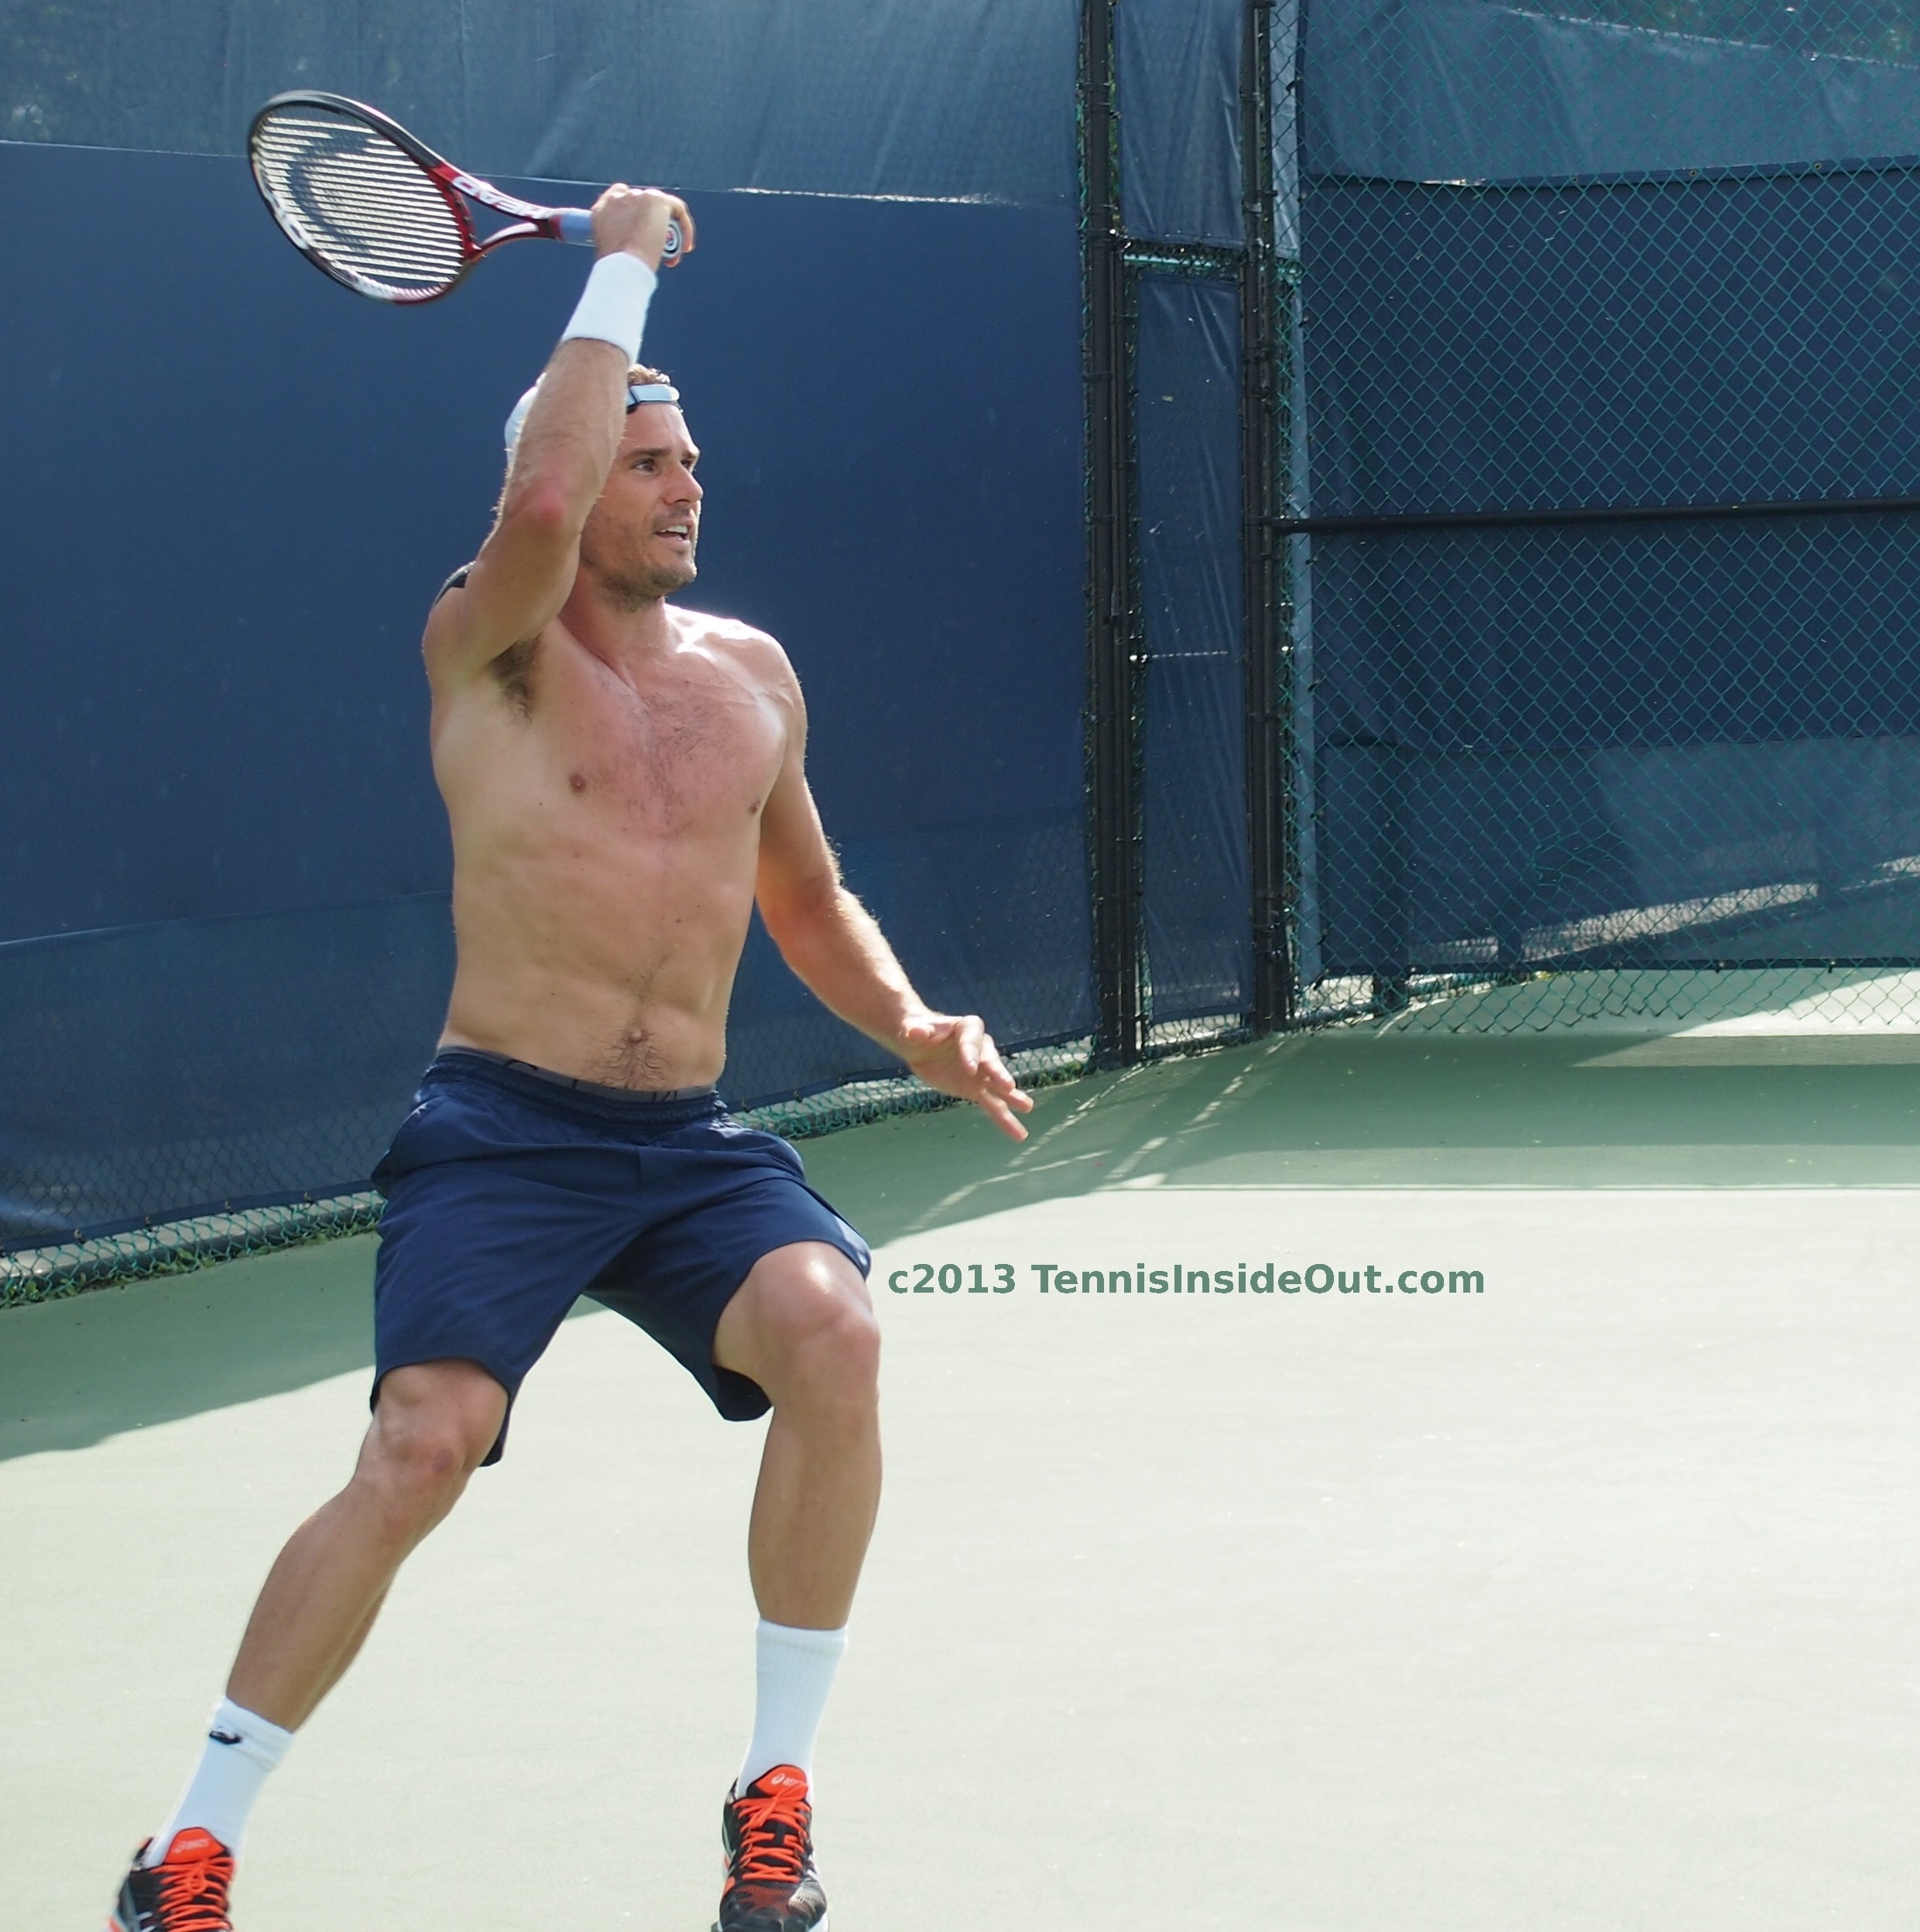 Shirtless-Tommy-practice-P1015569.jpg